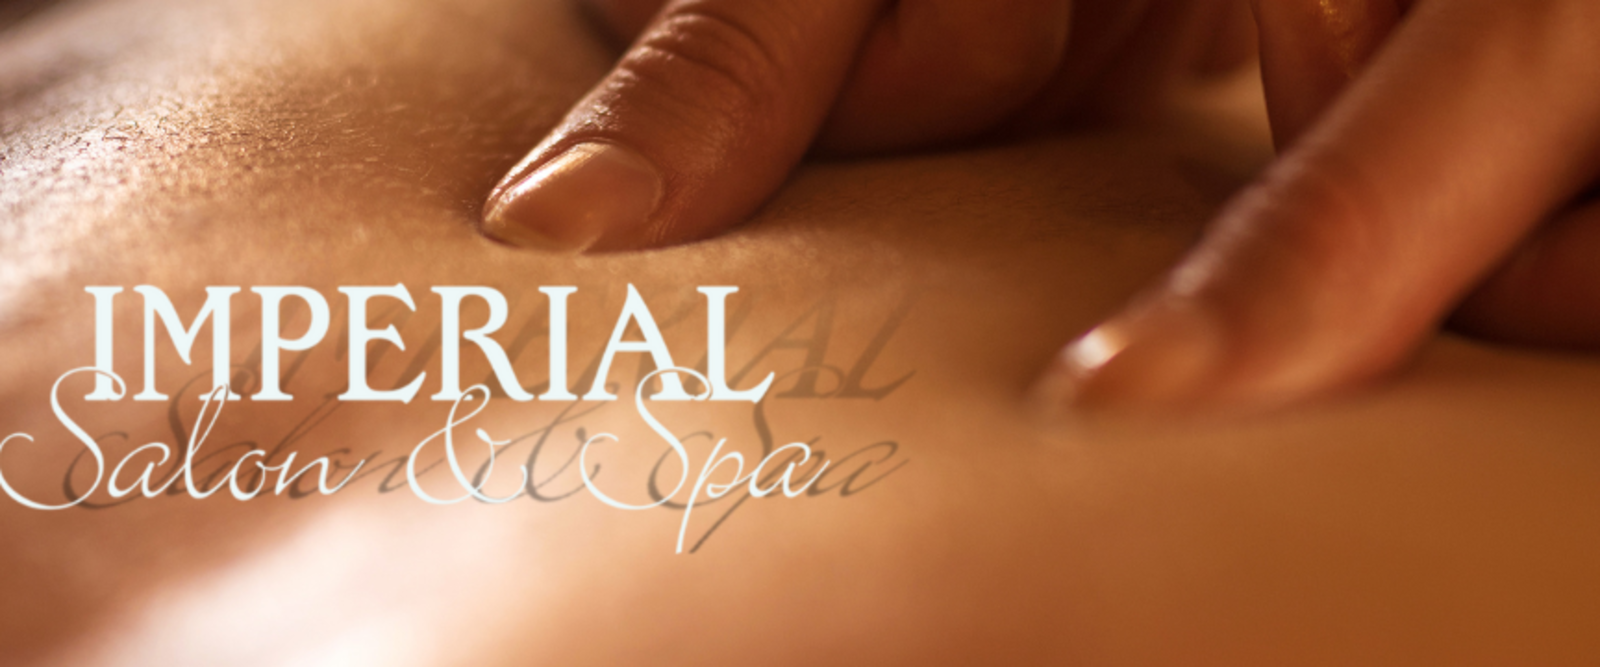 Relax With Imperial Salon and Spa